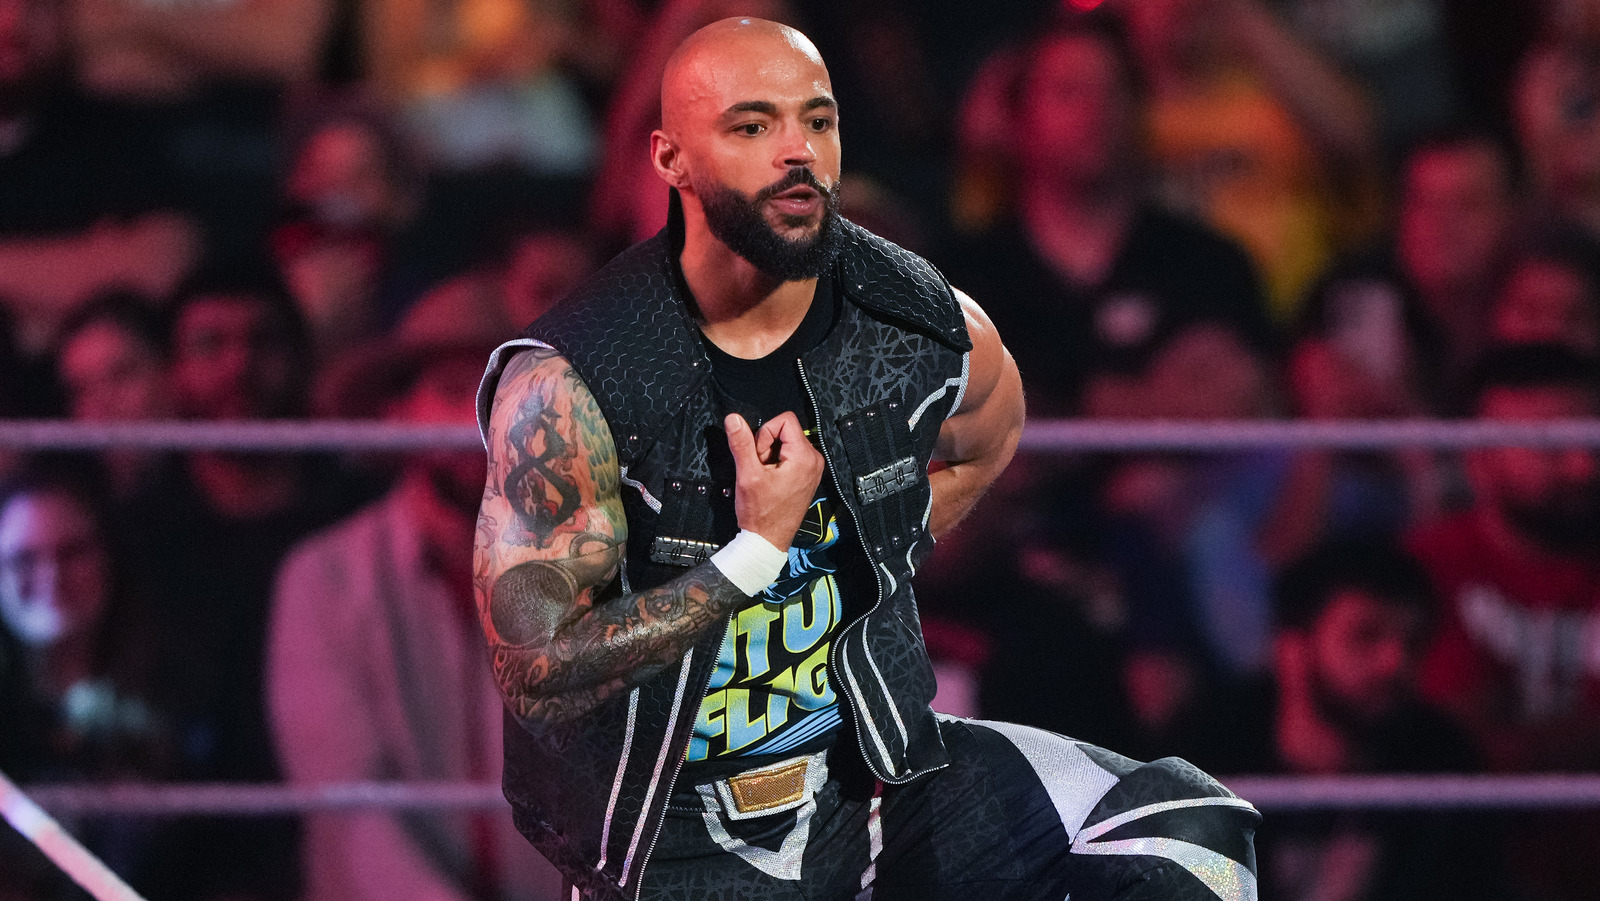 Dave Meltzer Provides Backstage Update On Ricochet's WWE Contract Situation